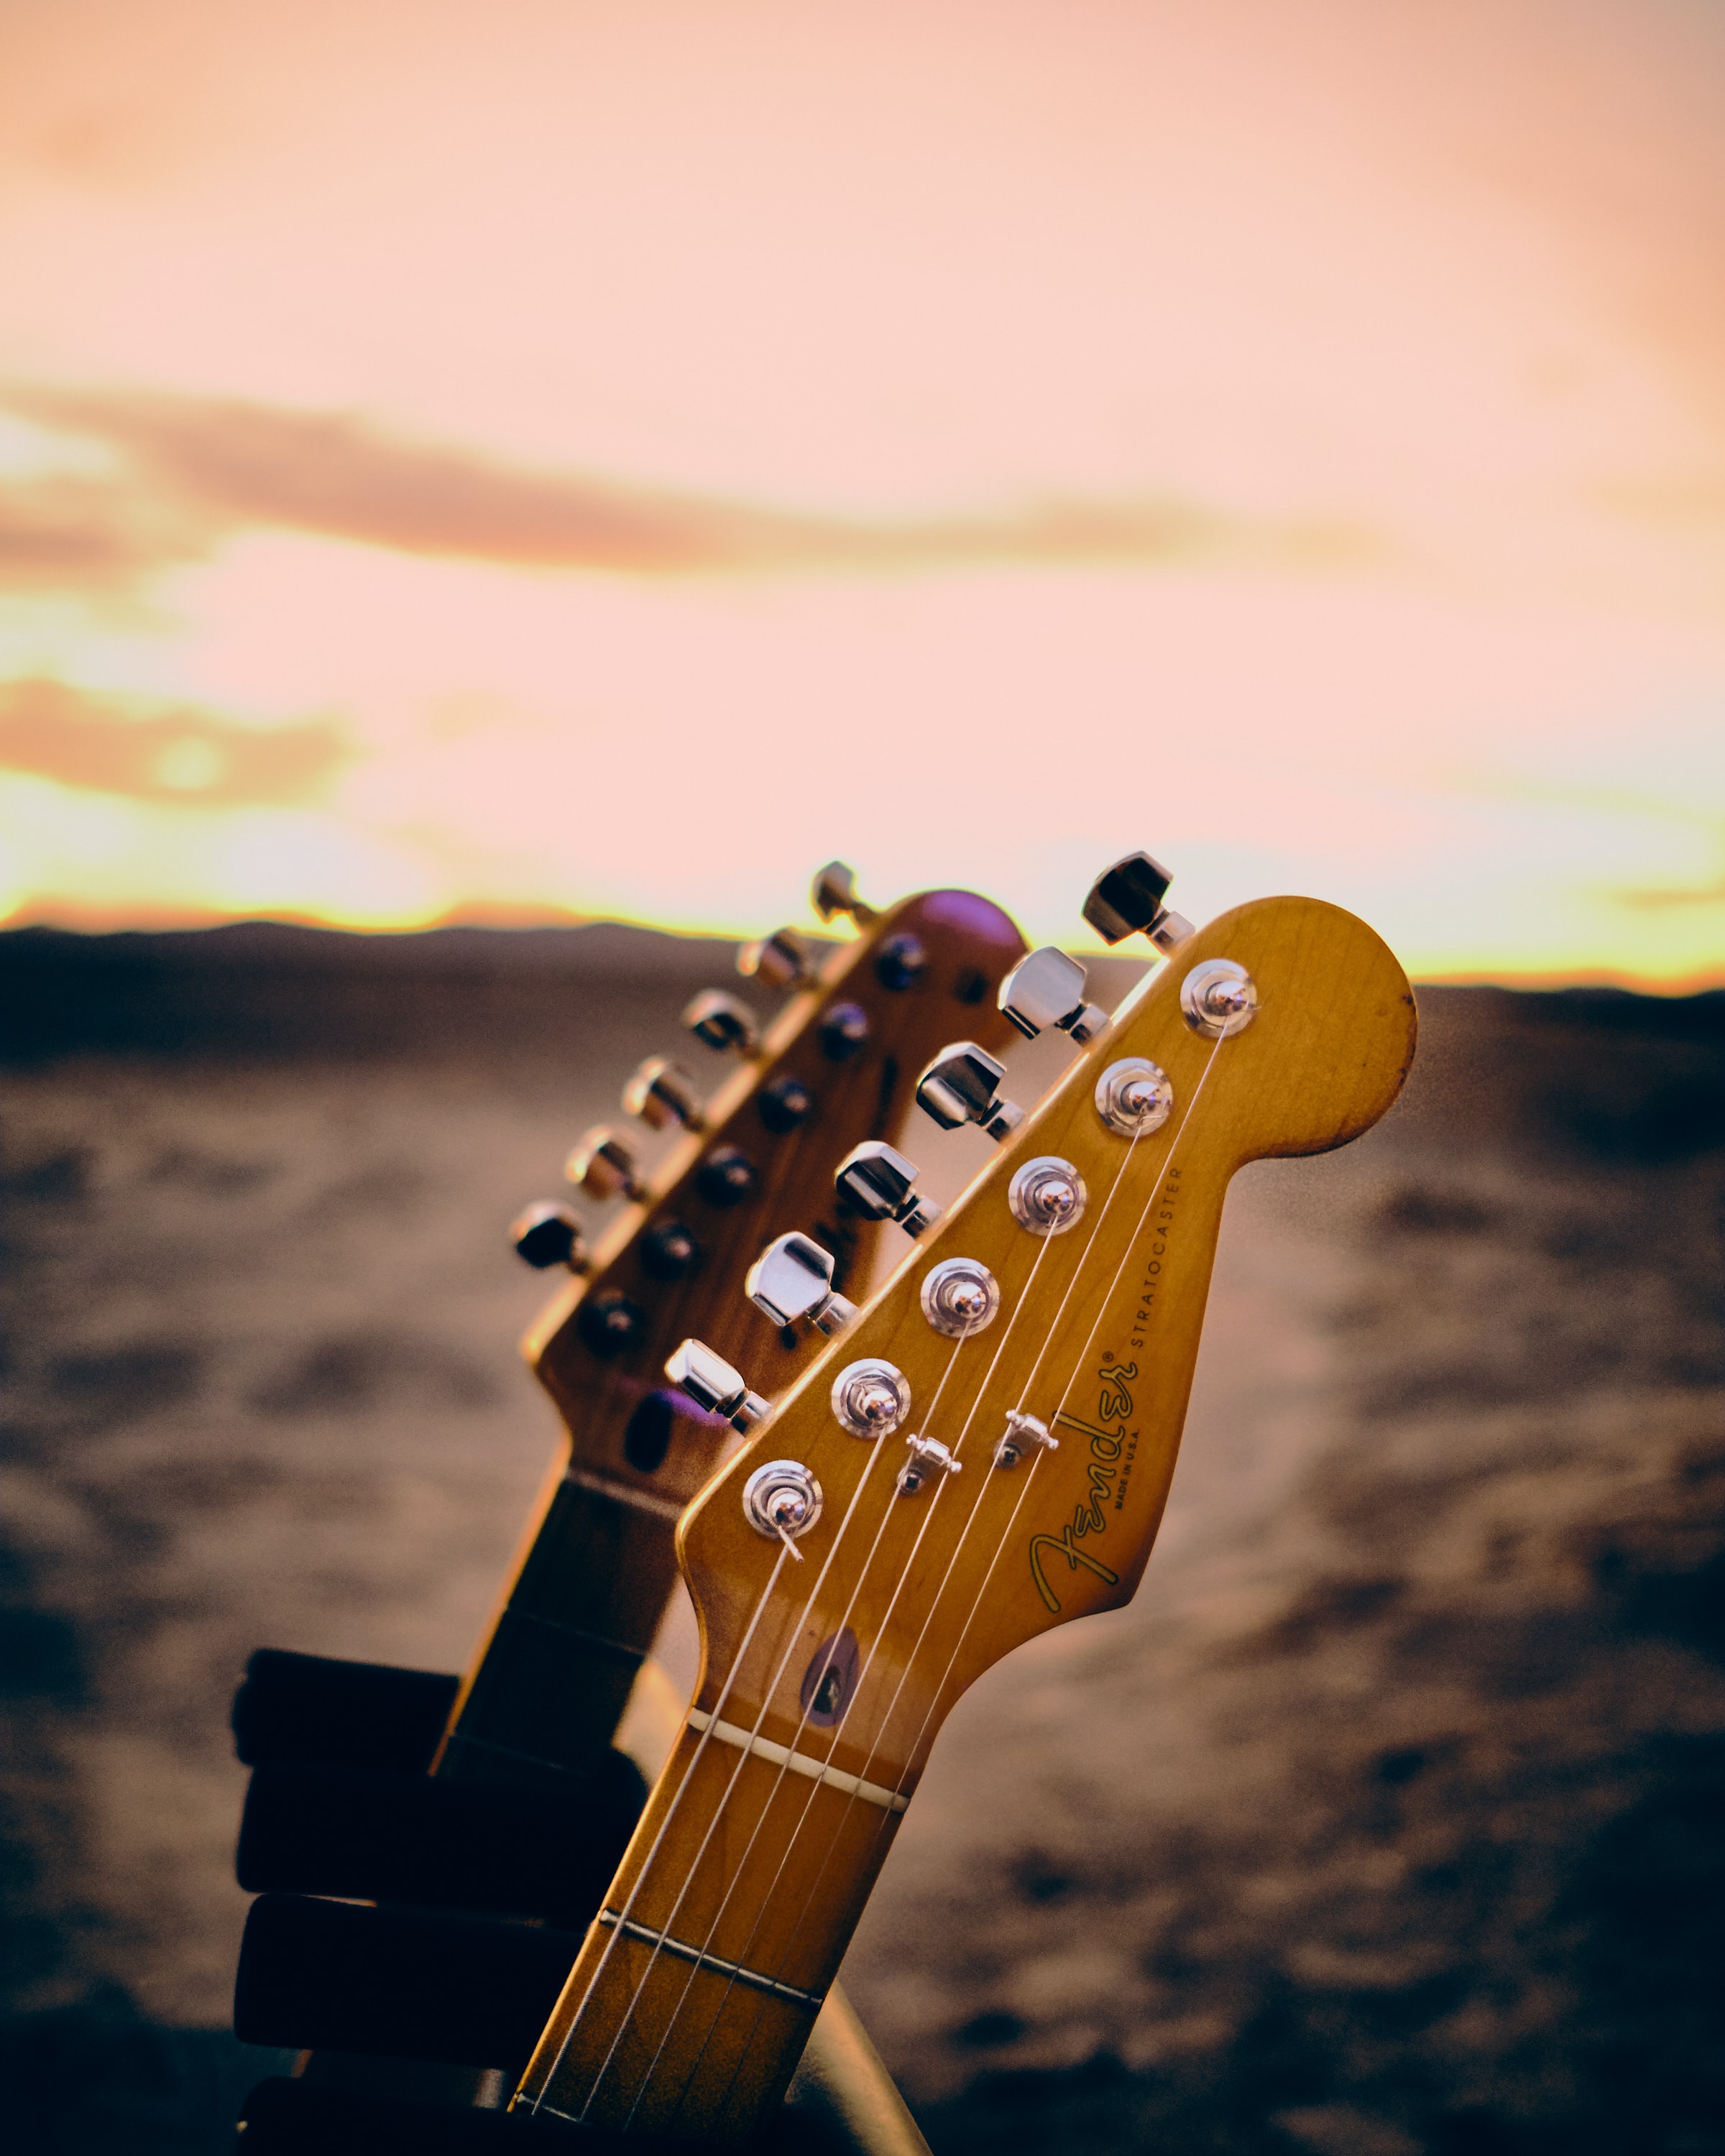 tuners, vulture, music, sunset collection of HD images